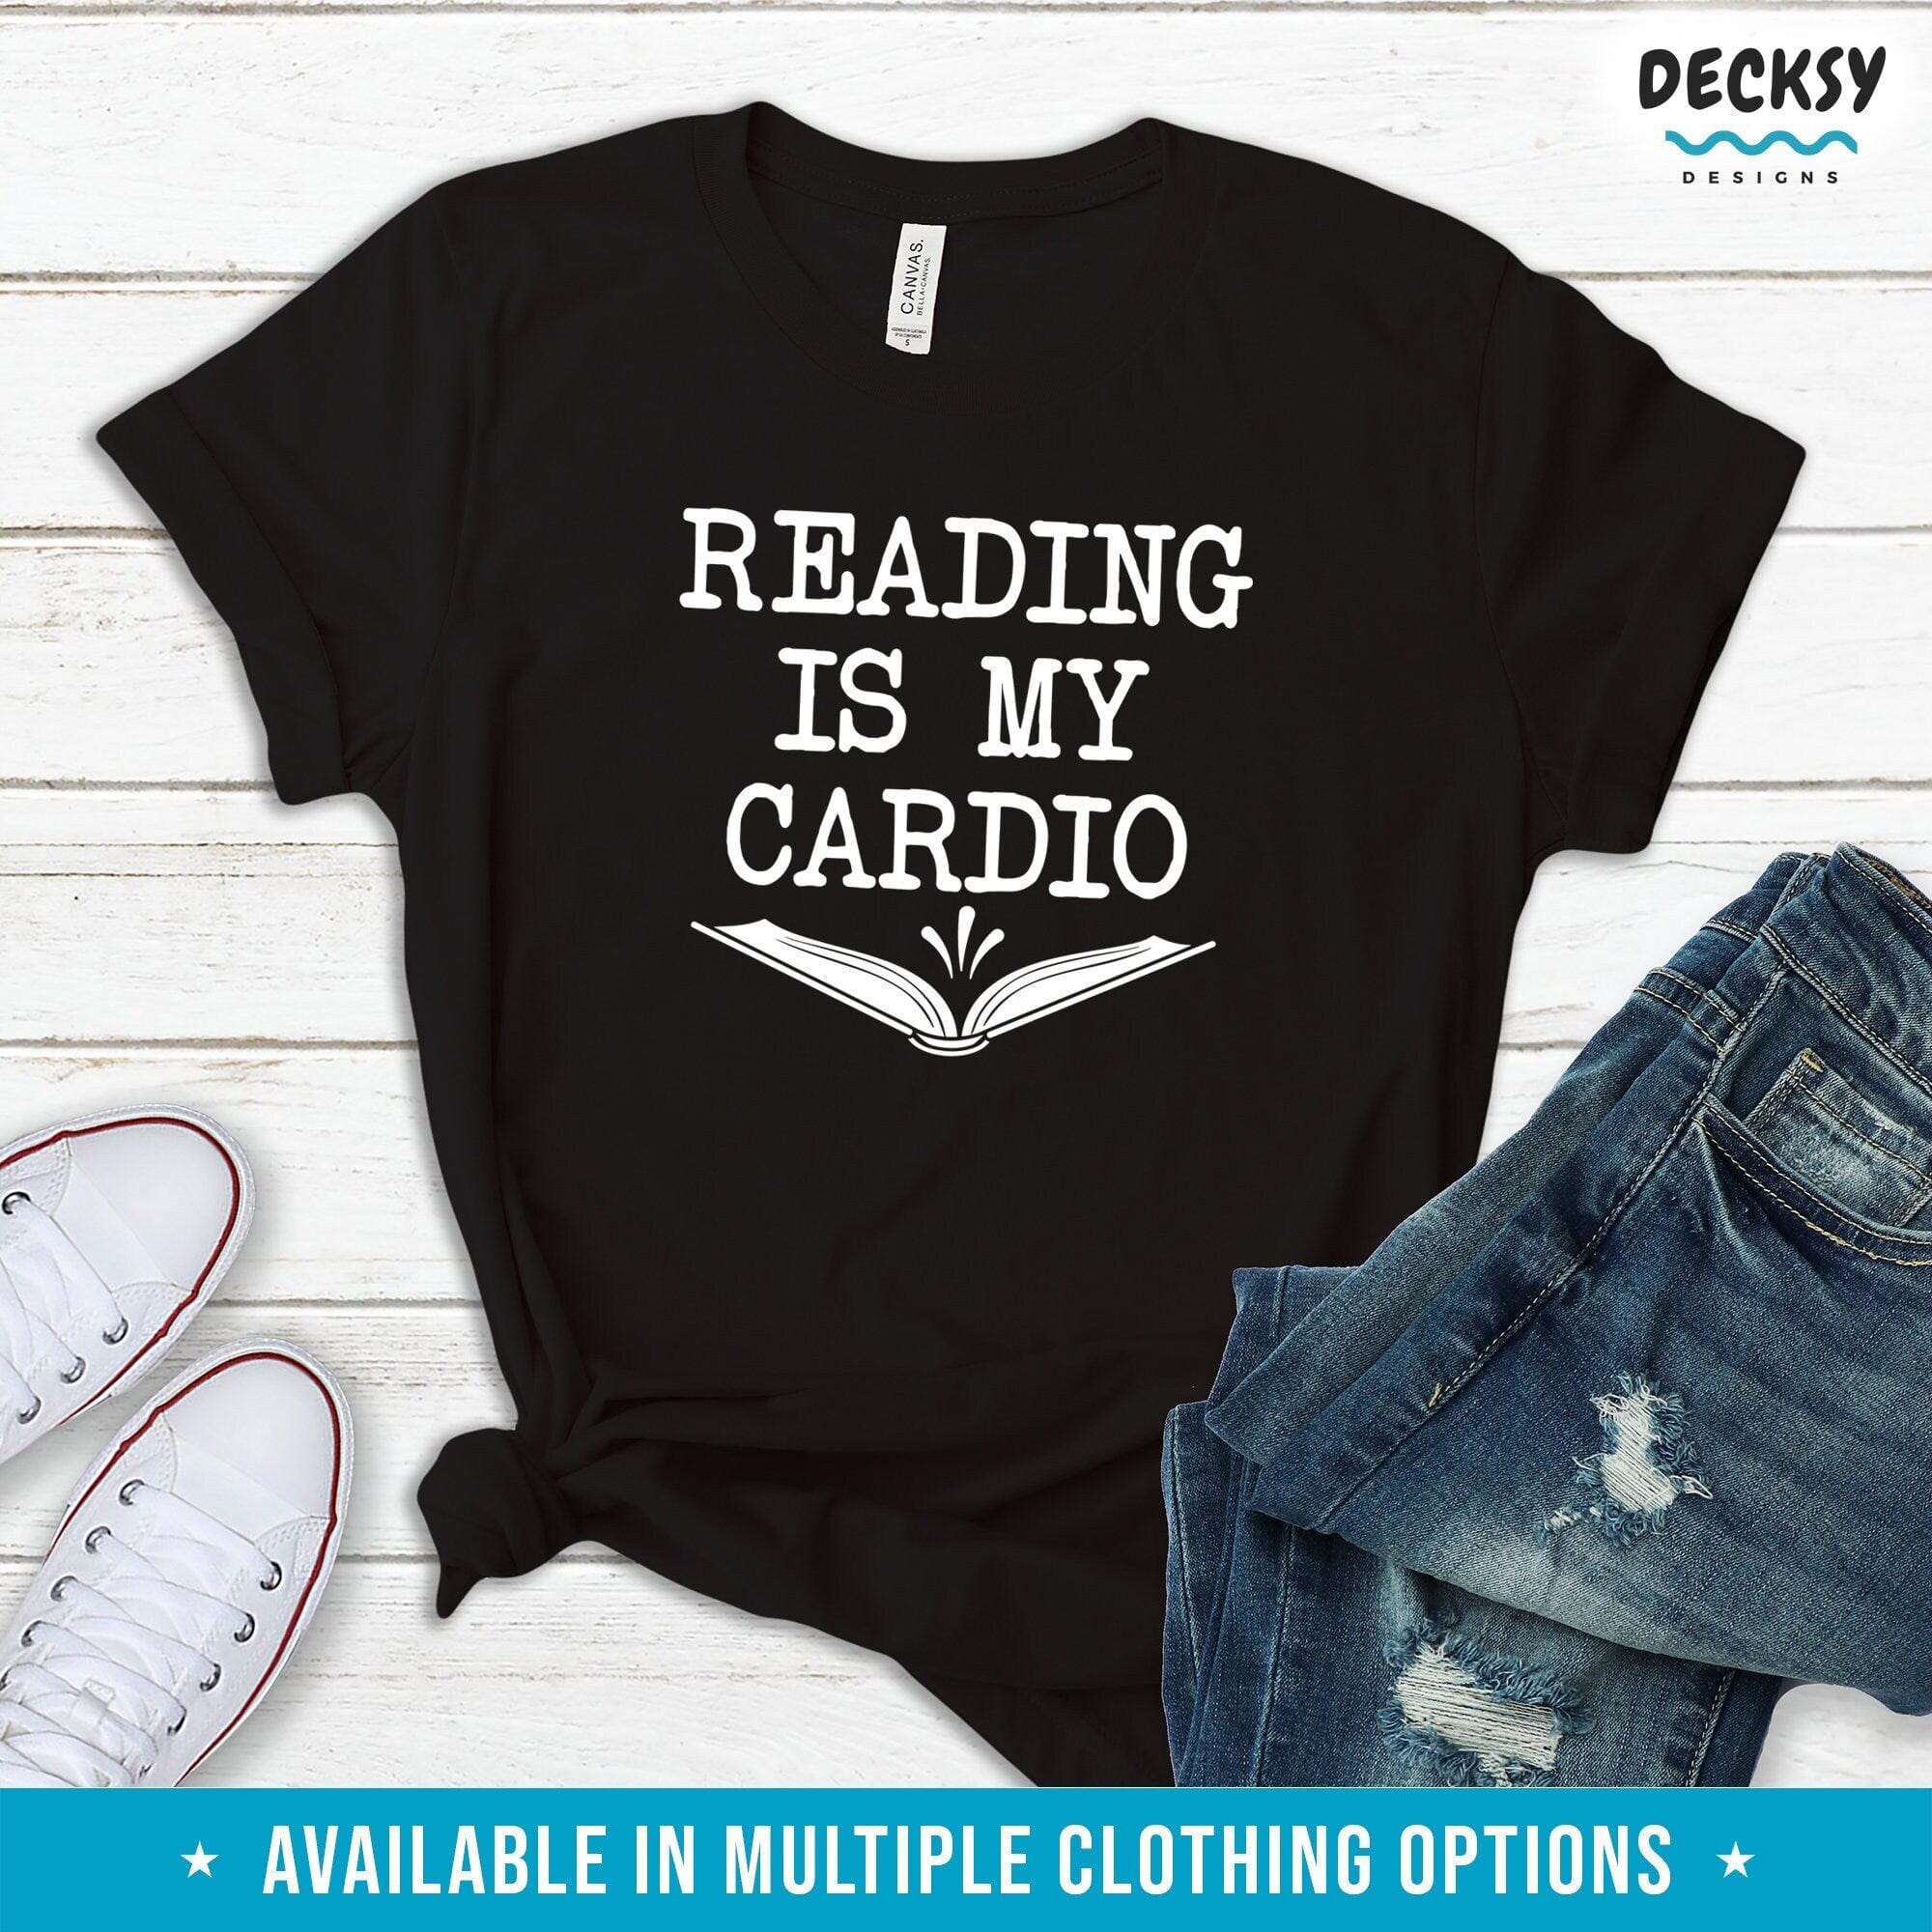 Reading Lover Shirt, Reader Gift-Clothing:Gender-Neutral Adult Clothing:Tops & Tees:T-shirts:Graphic Tees-DecksyDesigns